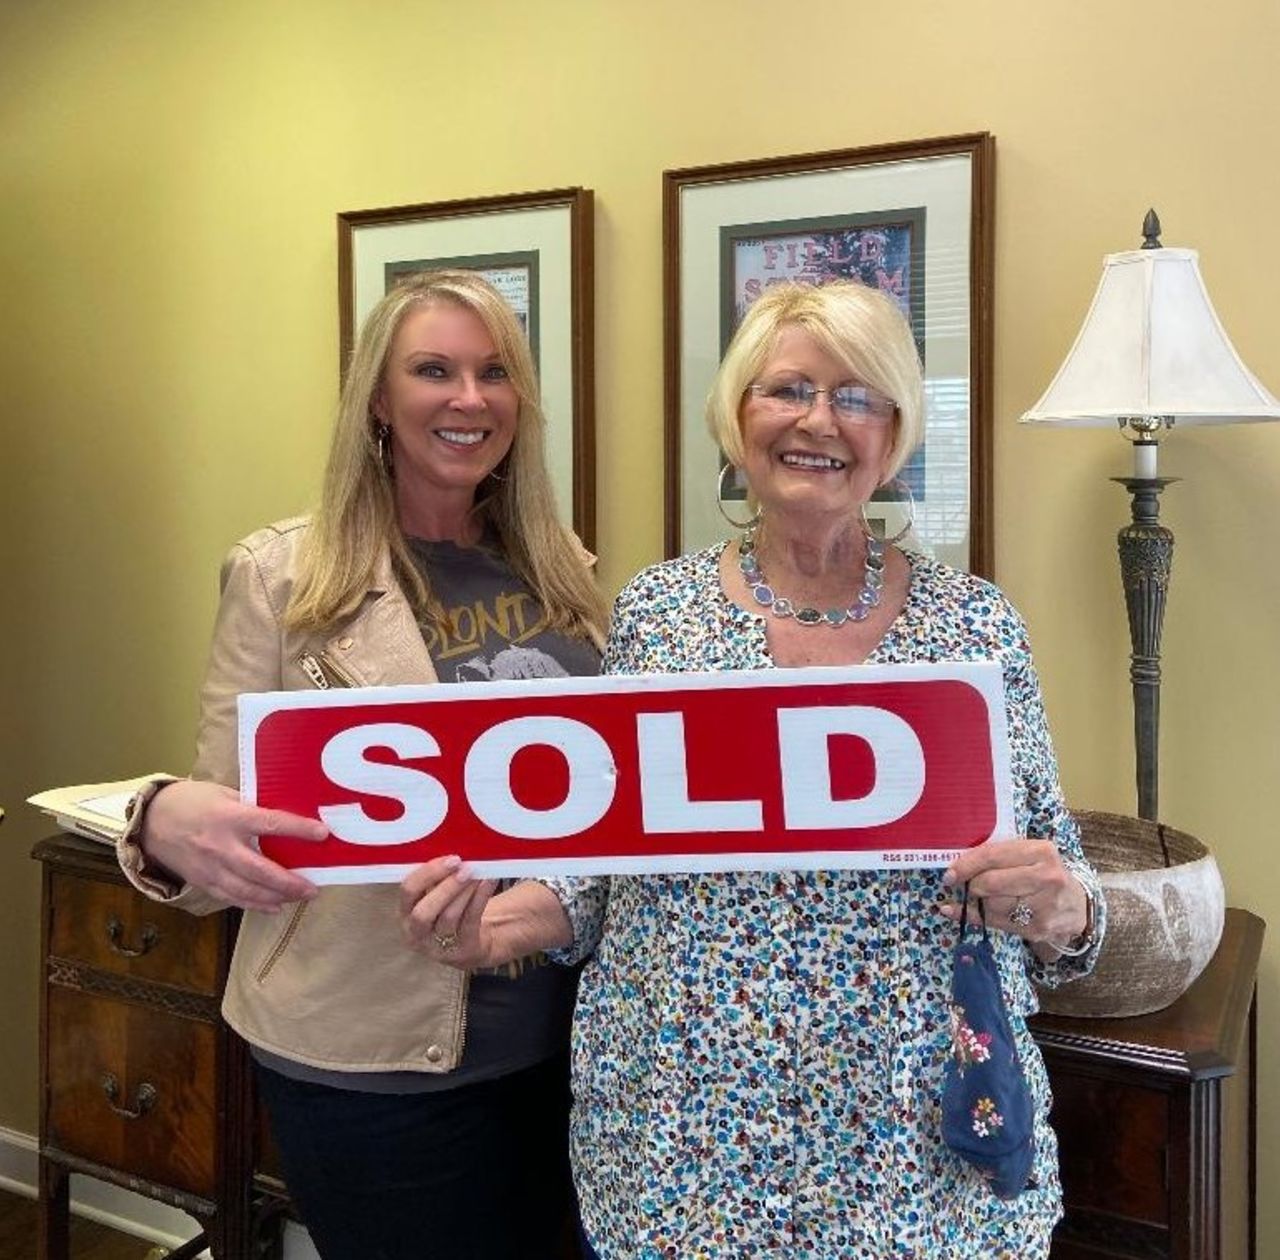 I consider Cindy as our personal realtor since she has found the perfect home for three members of my family. Thank you Cindy for a job well done.